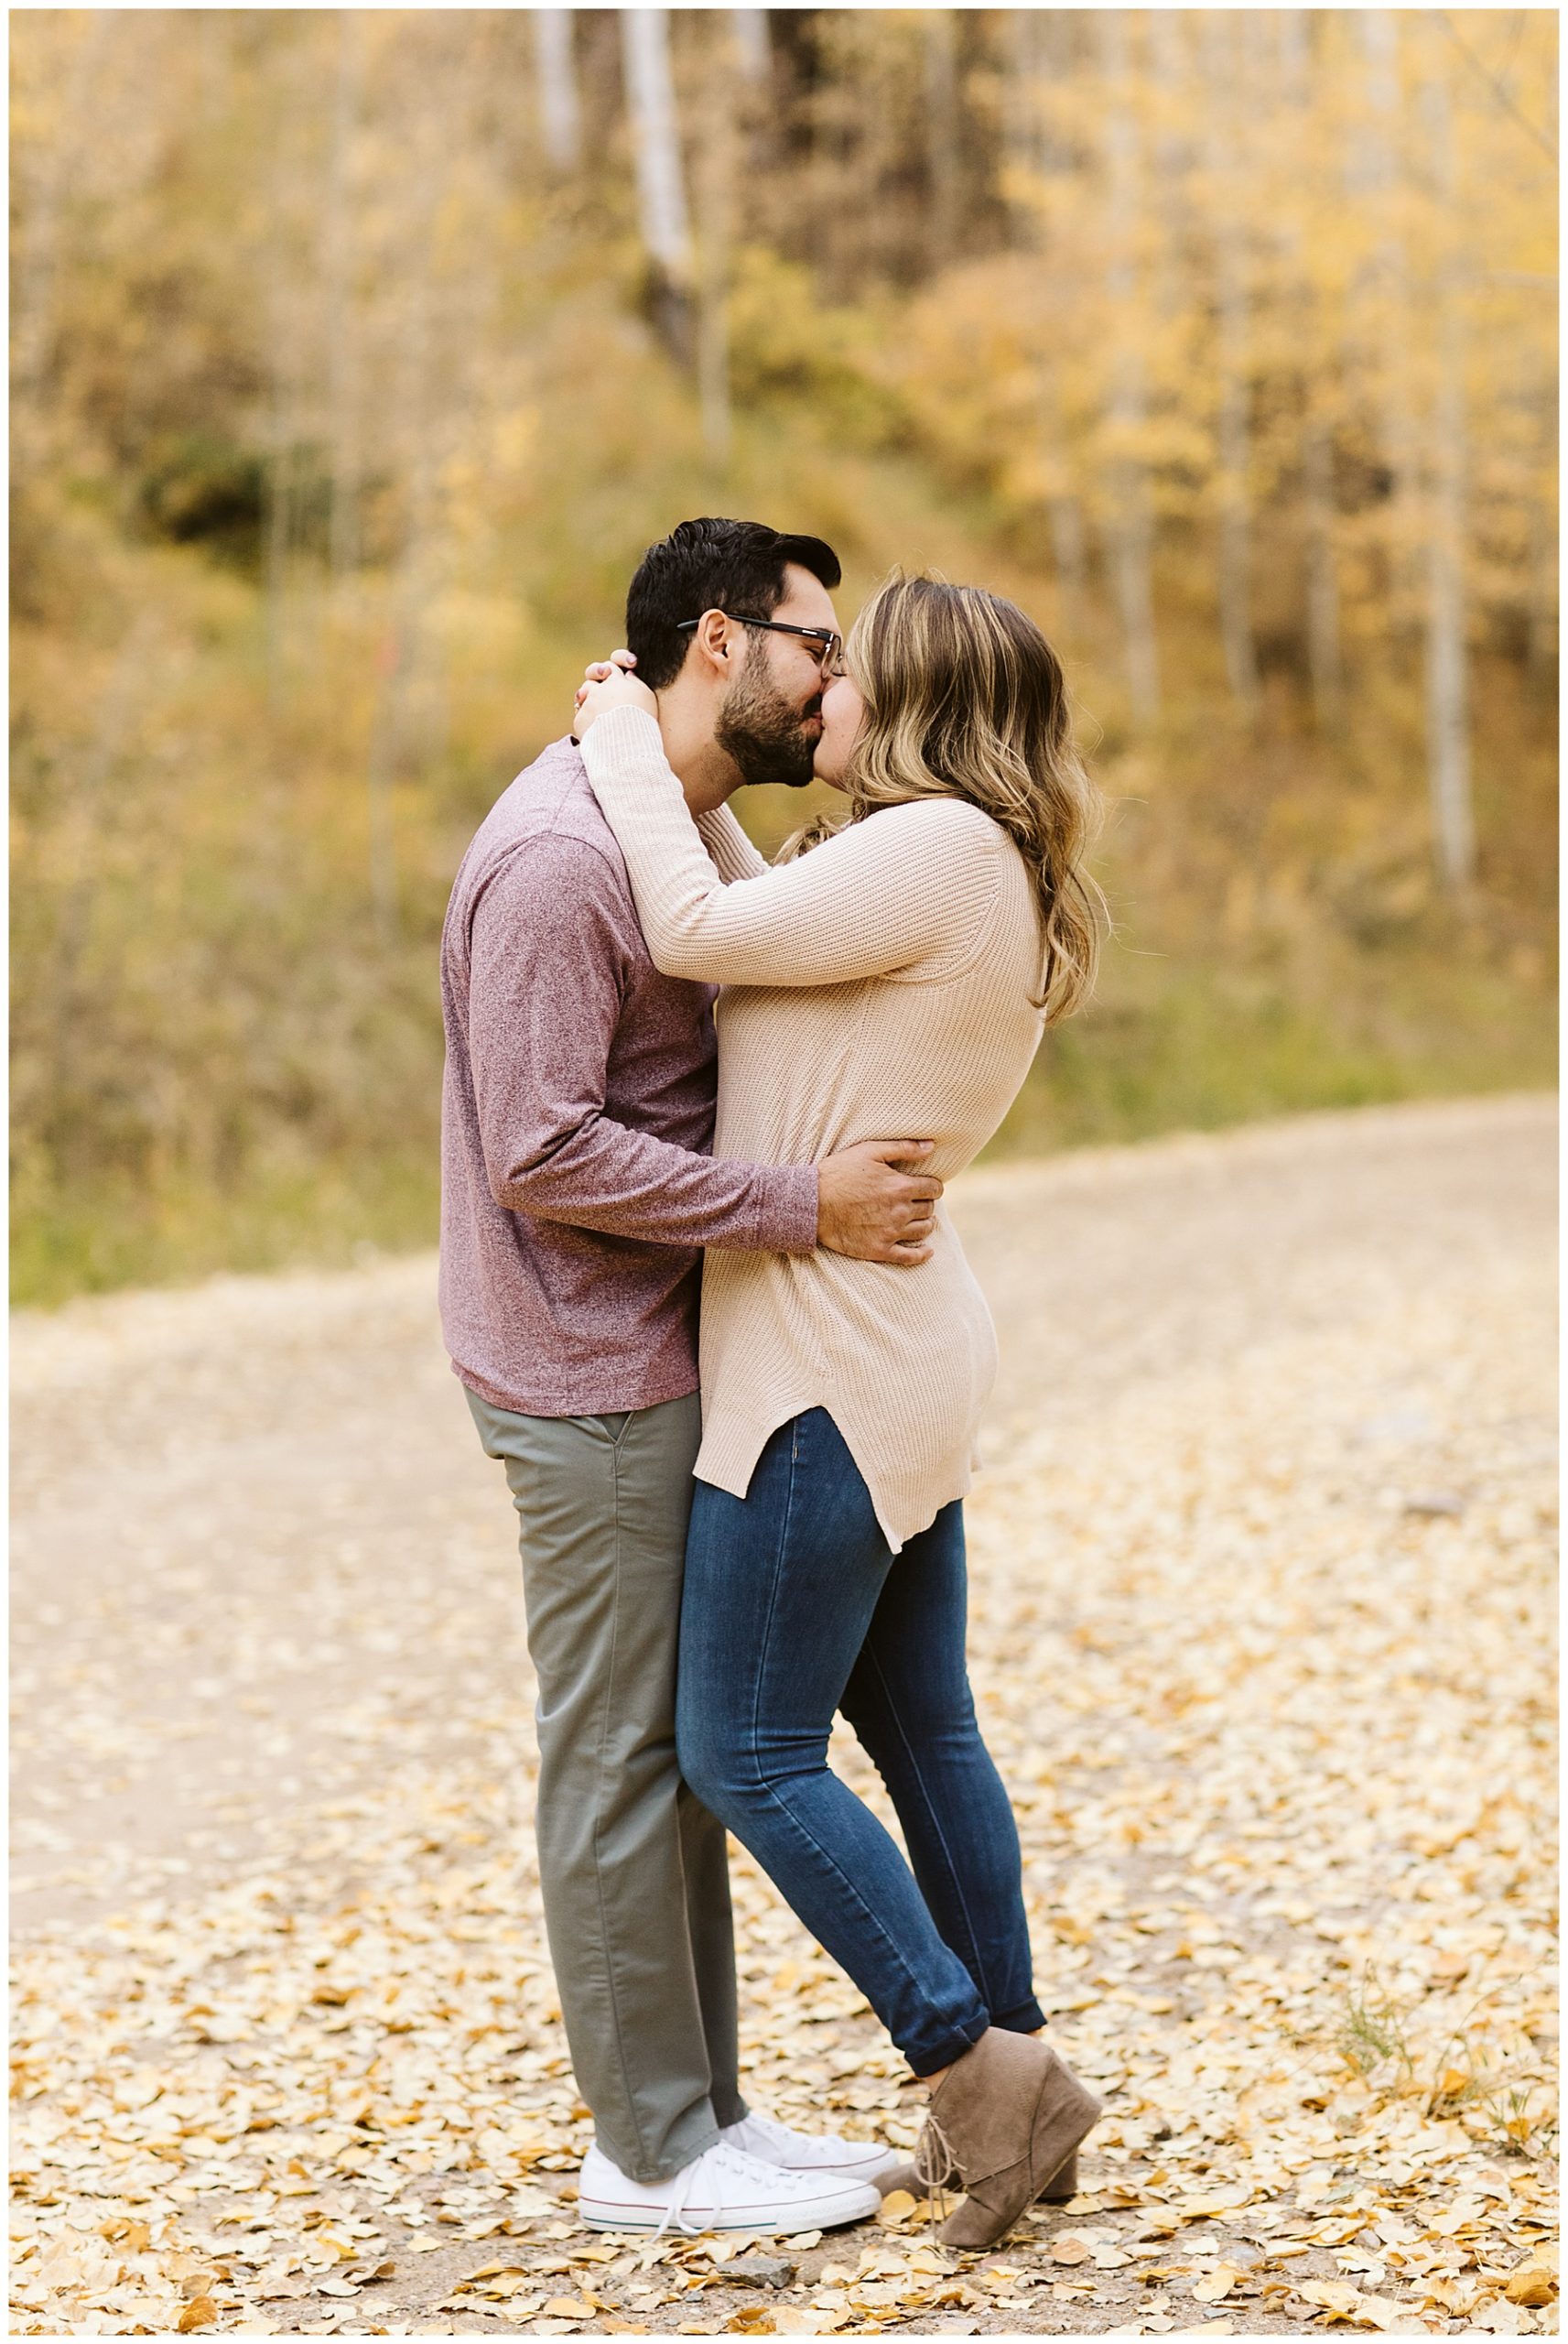 Couple kissing in road with aspen tree forest in background, a beautiful fall engagement photos backdrop.